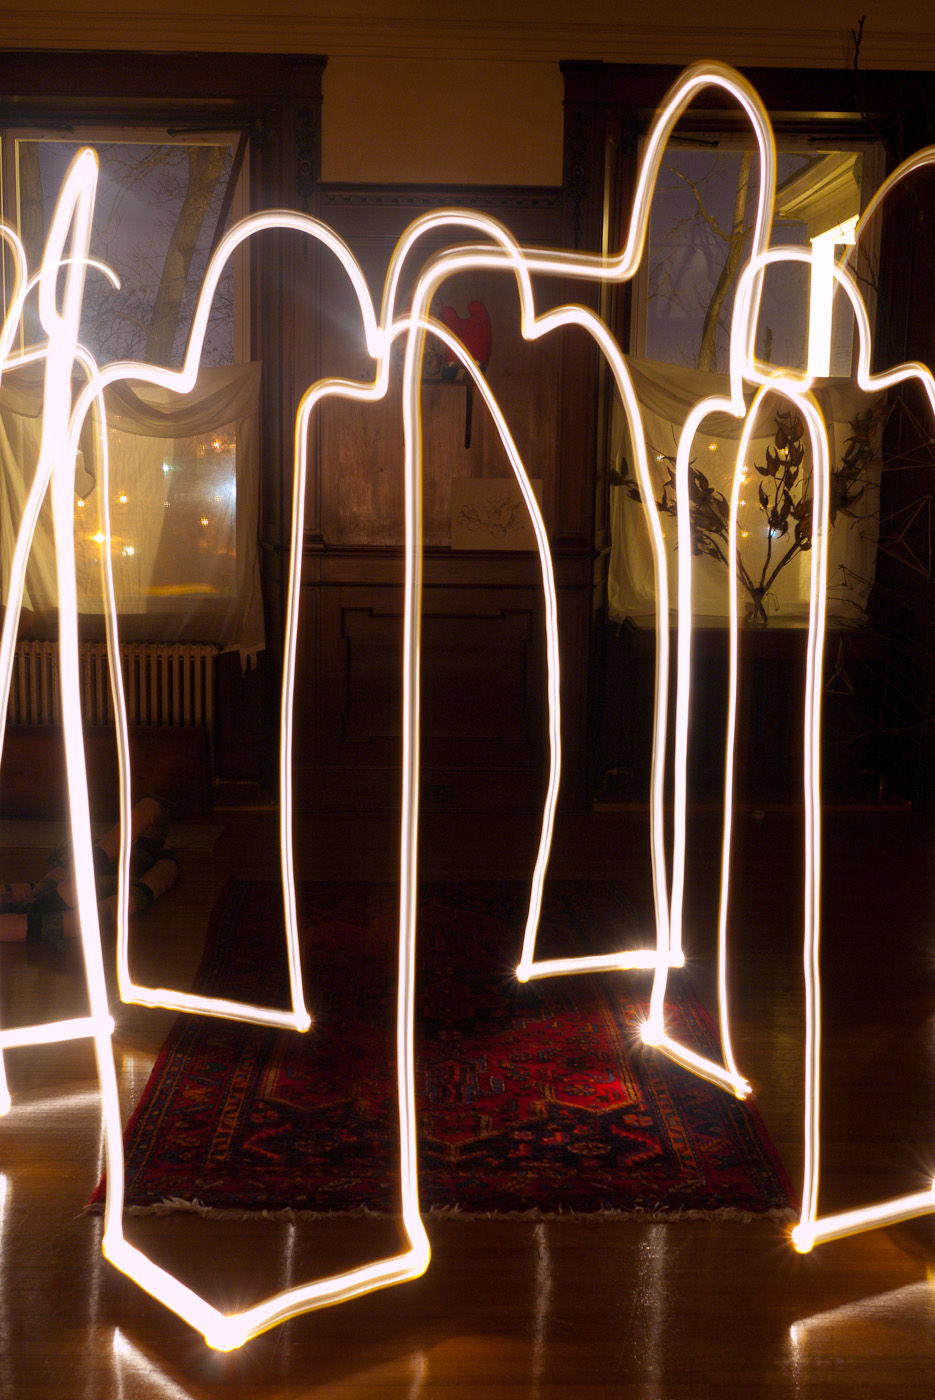 Light trails drawing of figures standing randomly arranged in a room.